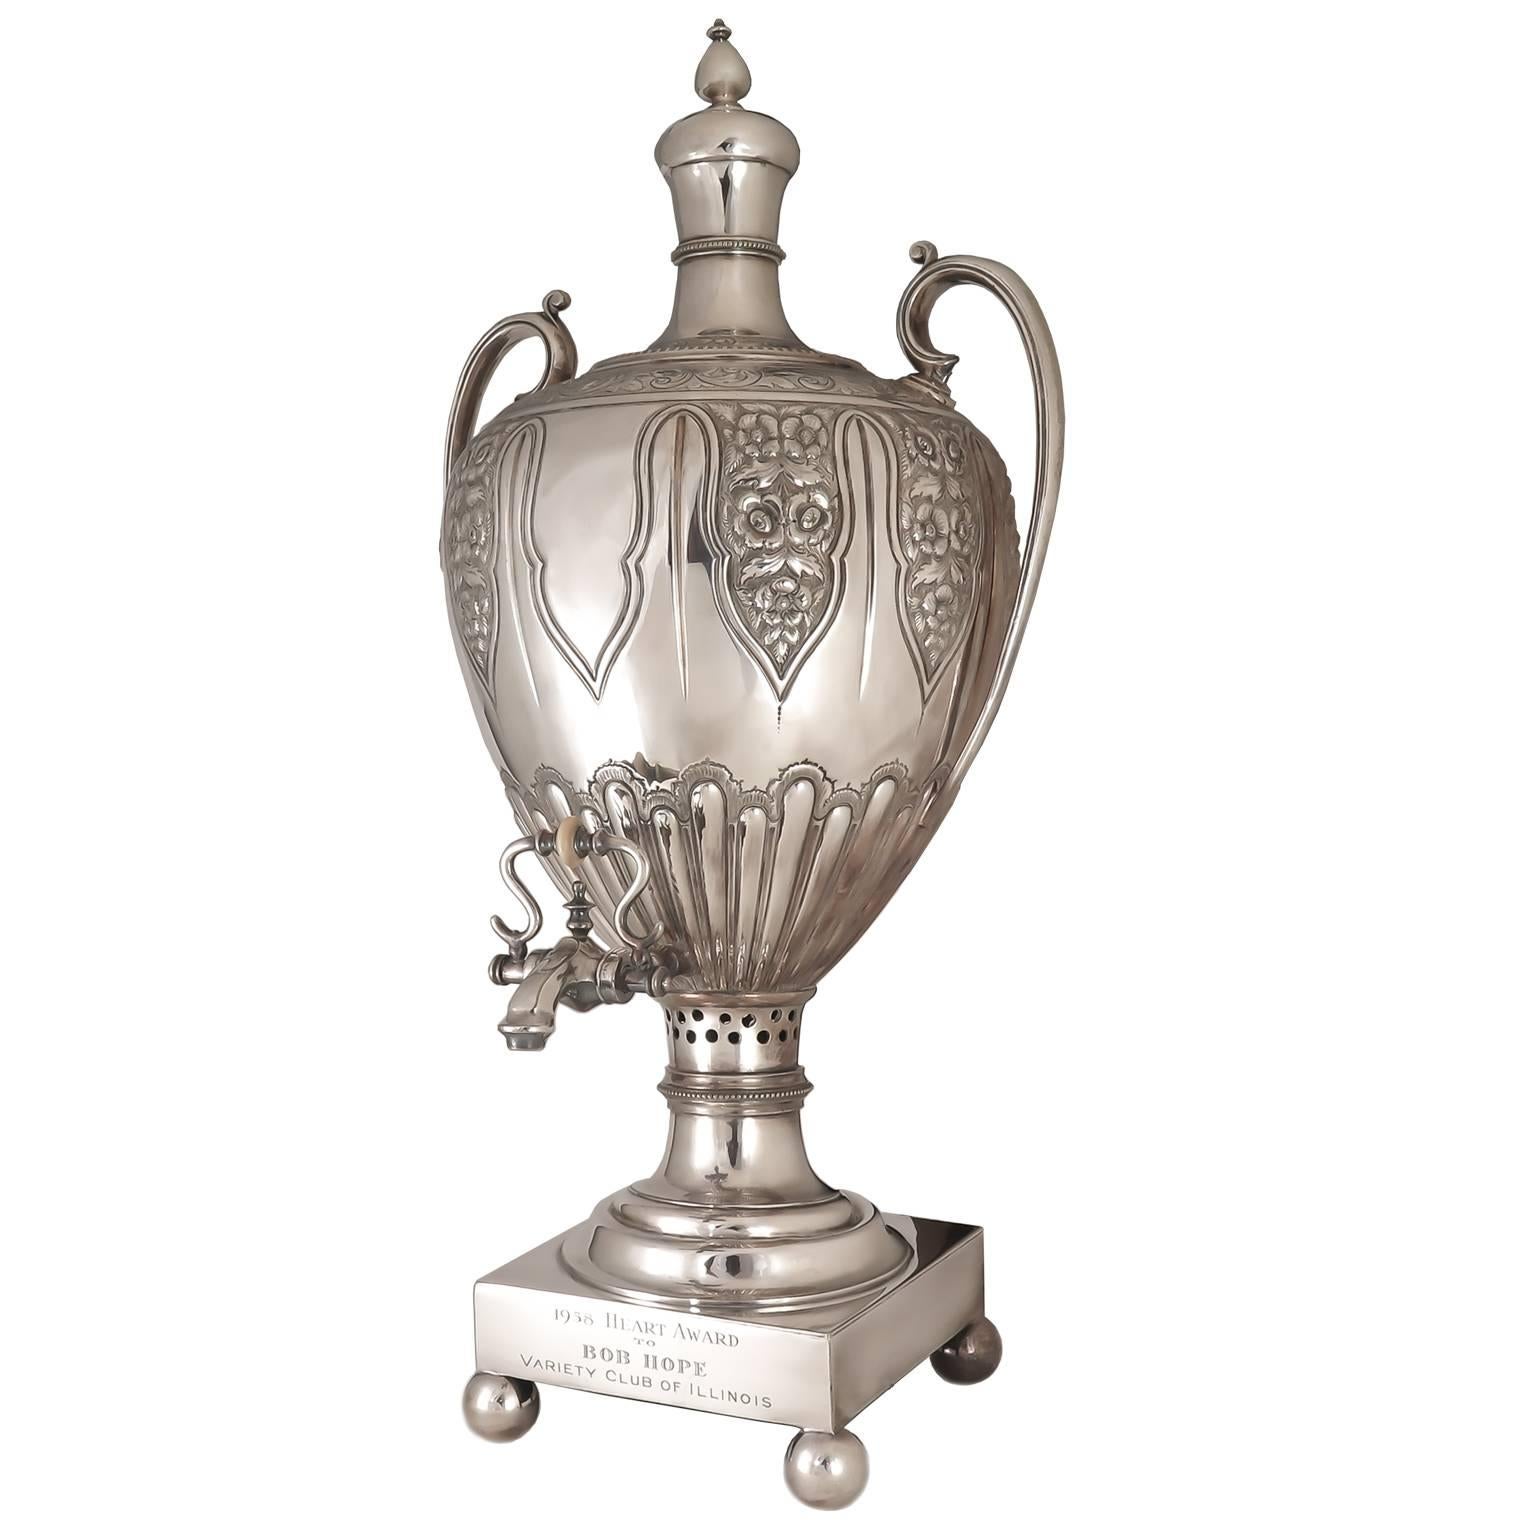 Circa 1900 Hand Chased Silver Plate Hot Water Urn, probably English and Presented to Bob Hope, measuring 26